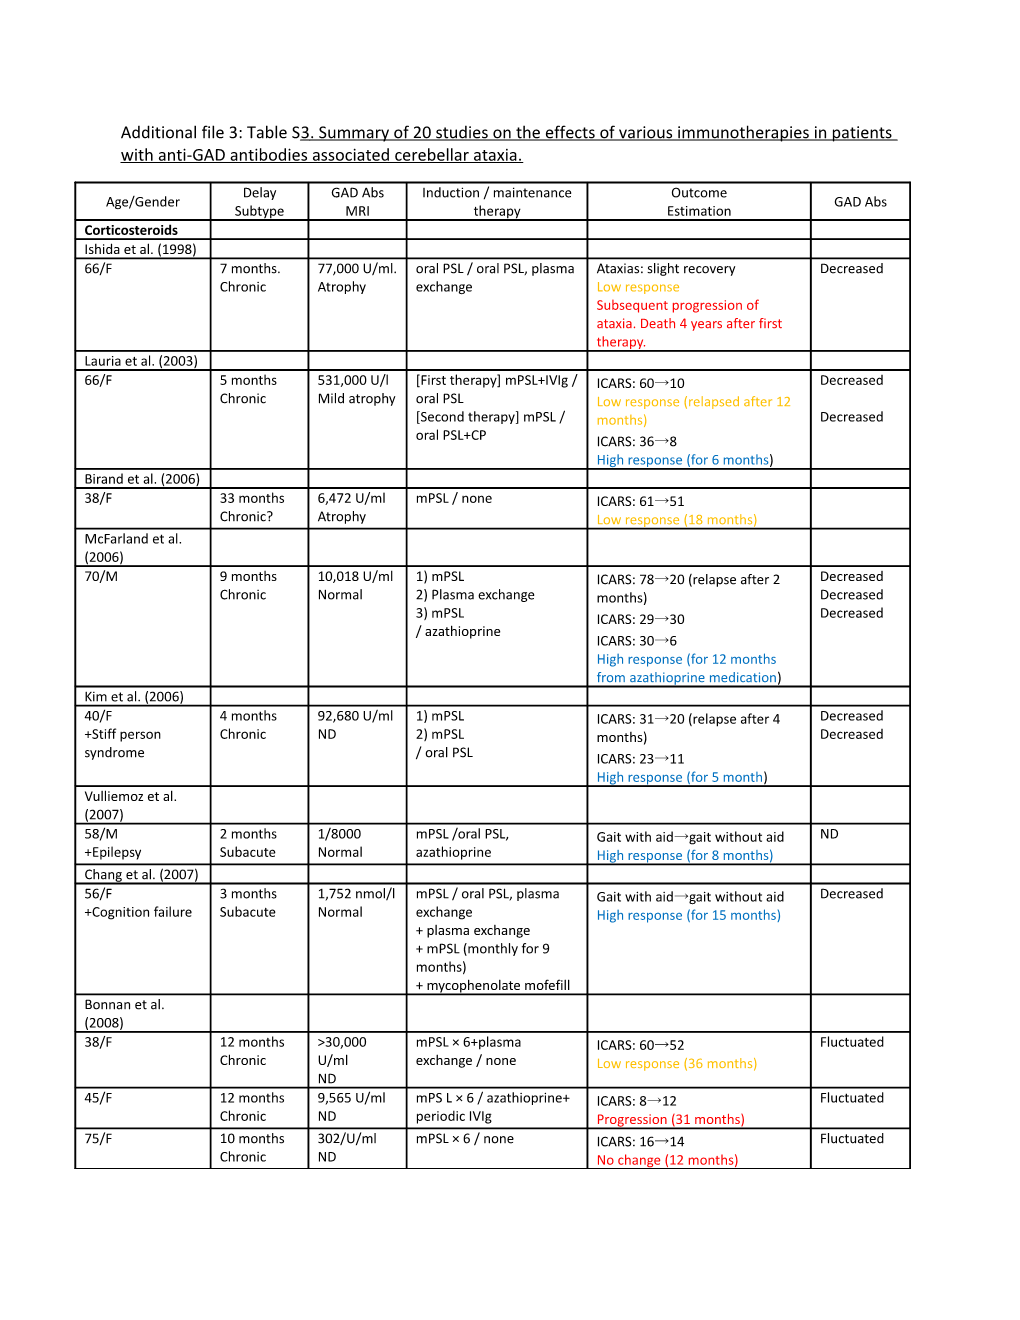 Additional File 3: Table S3. Summary of 20 Studies on the Effects of Various Immunotherapies